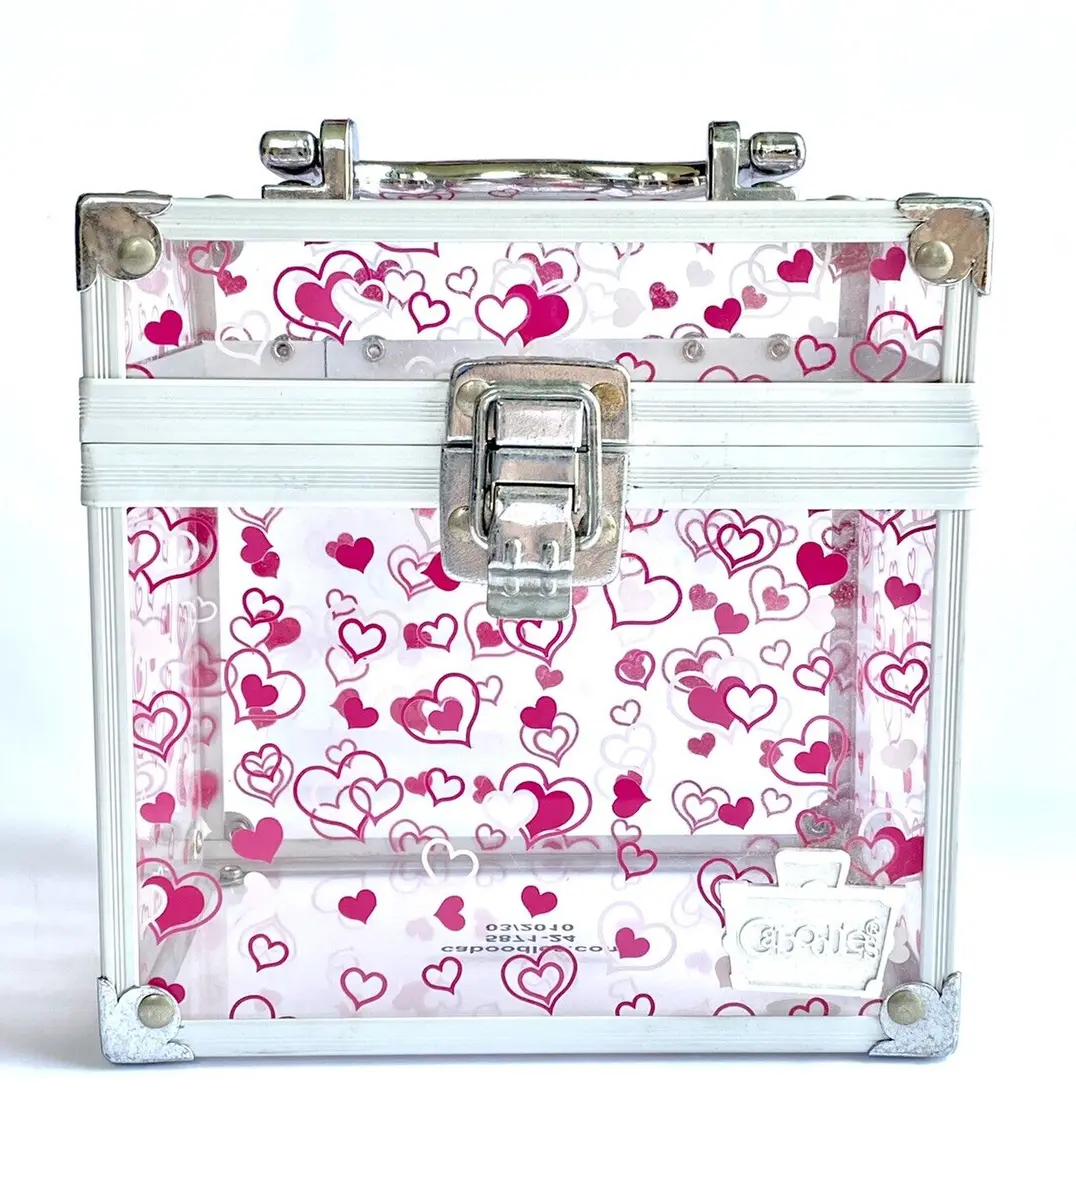 Caboodles 2010 Clear Acrylic Pink White Hearts Makeup Train Case